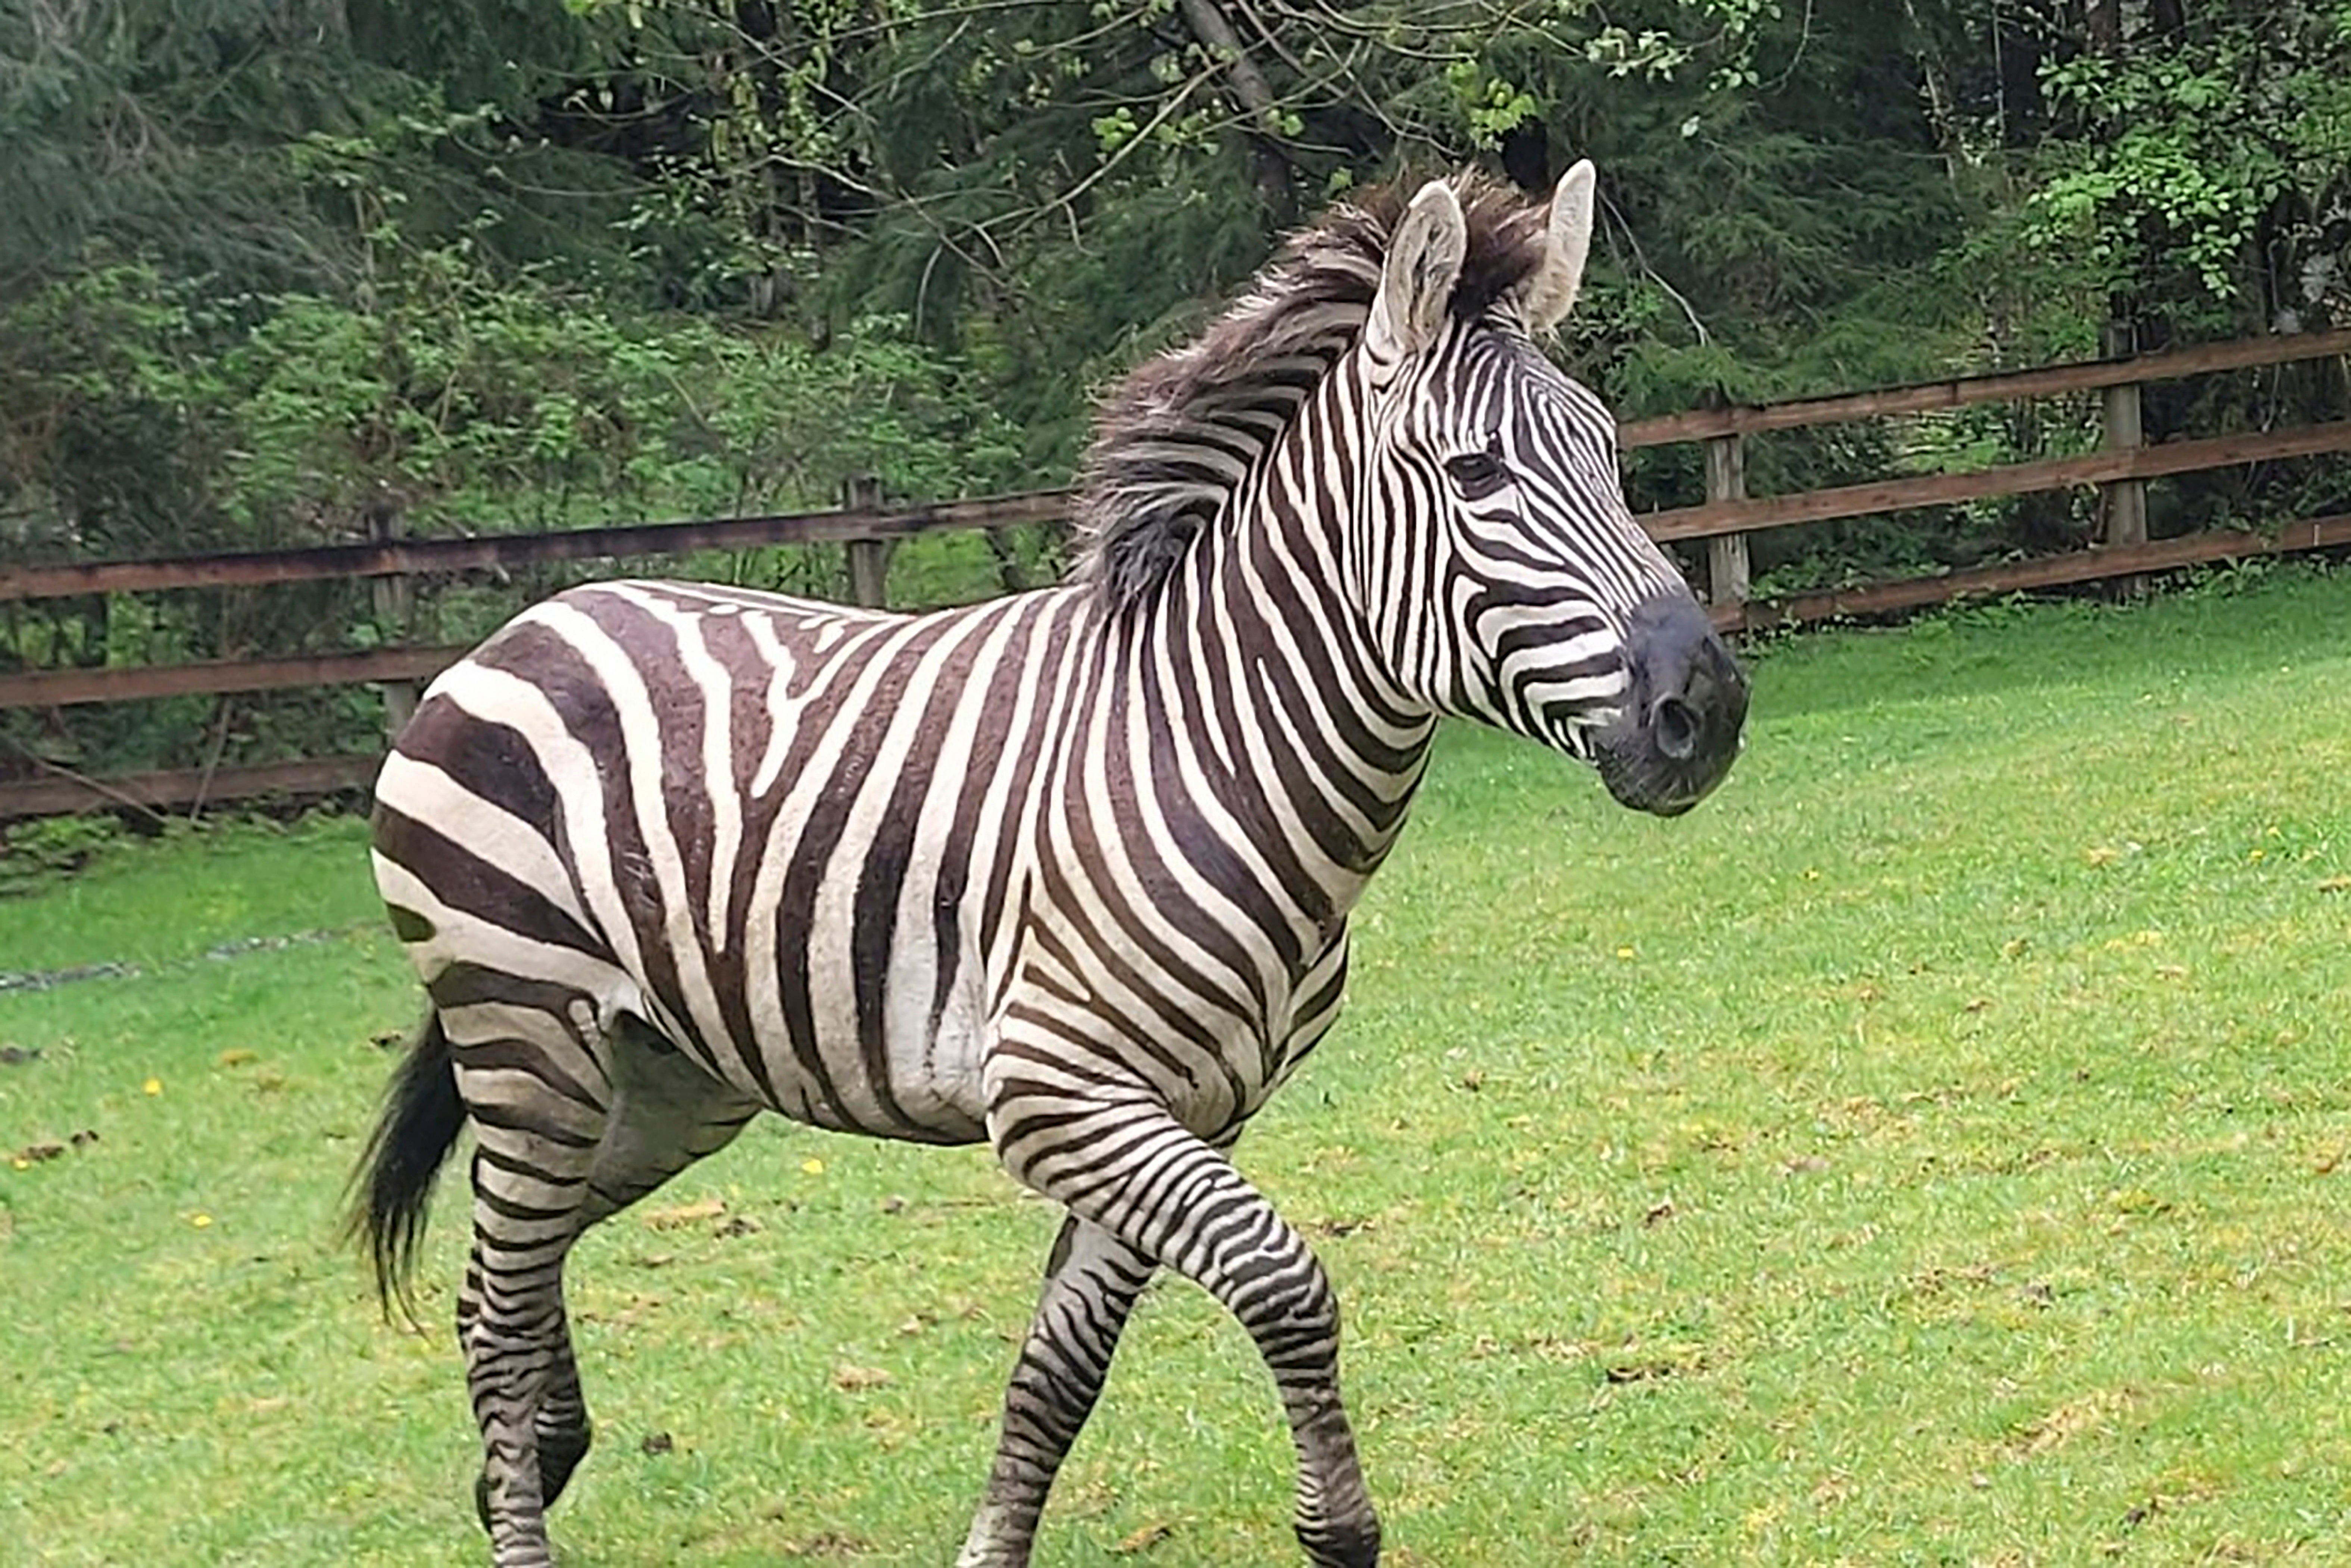 One zebra remains on the loose after their owner pulled over near I-90 to fix a mat in their trailer, leaving four of the animals to bolt off